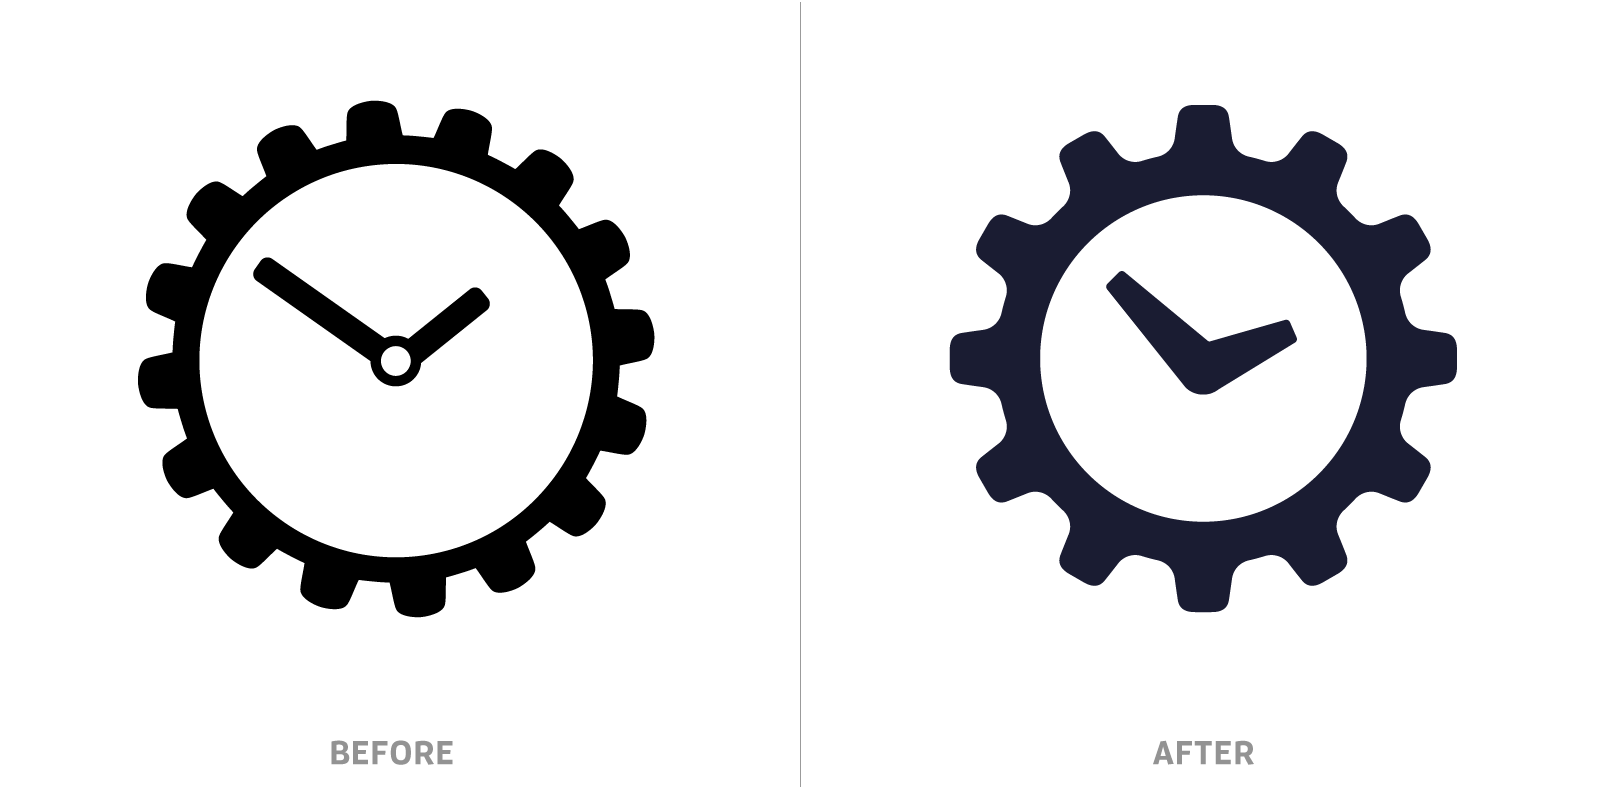 Side-by-side comparison of the old steamclock logo versus the new minamilist logo